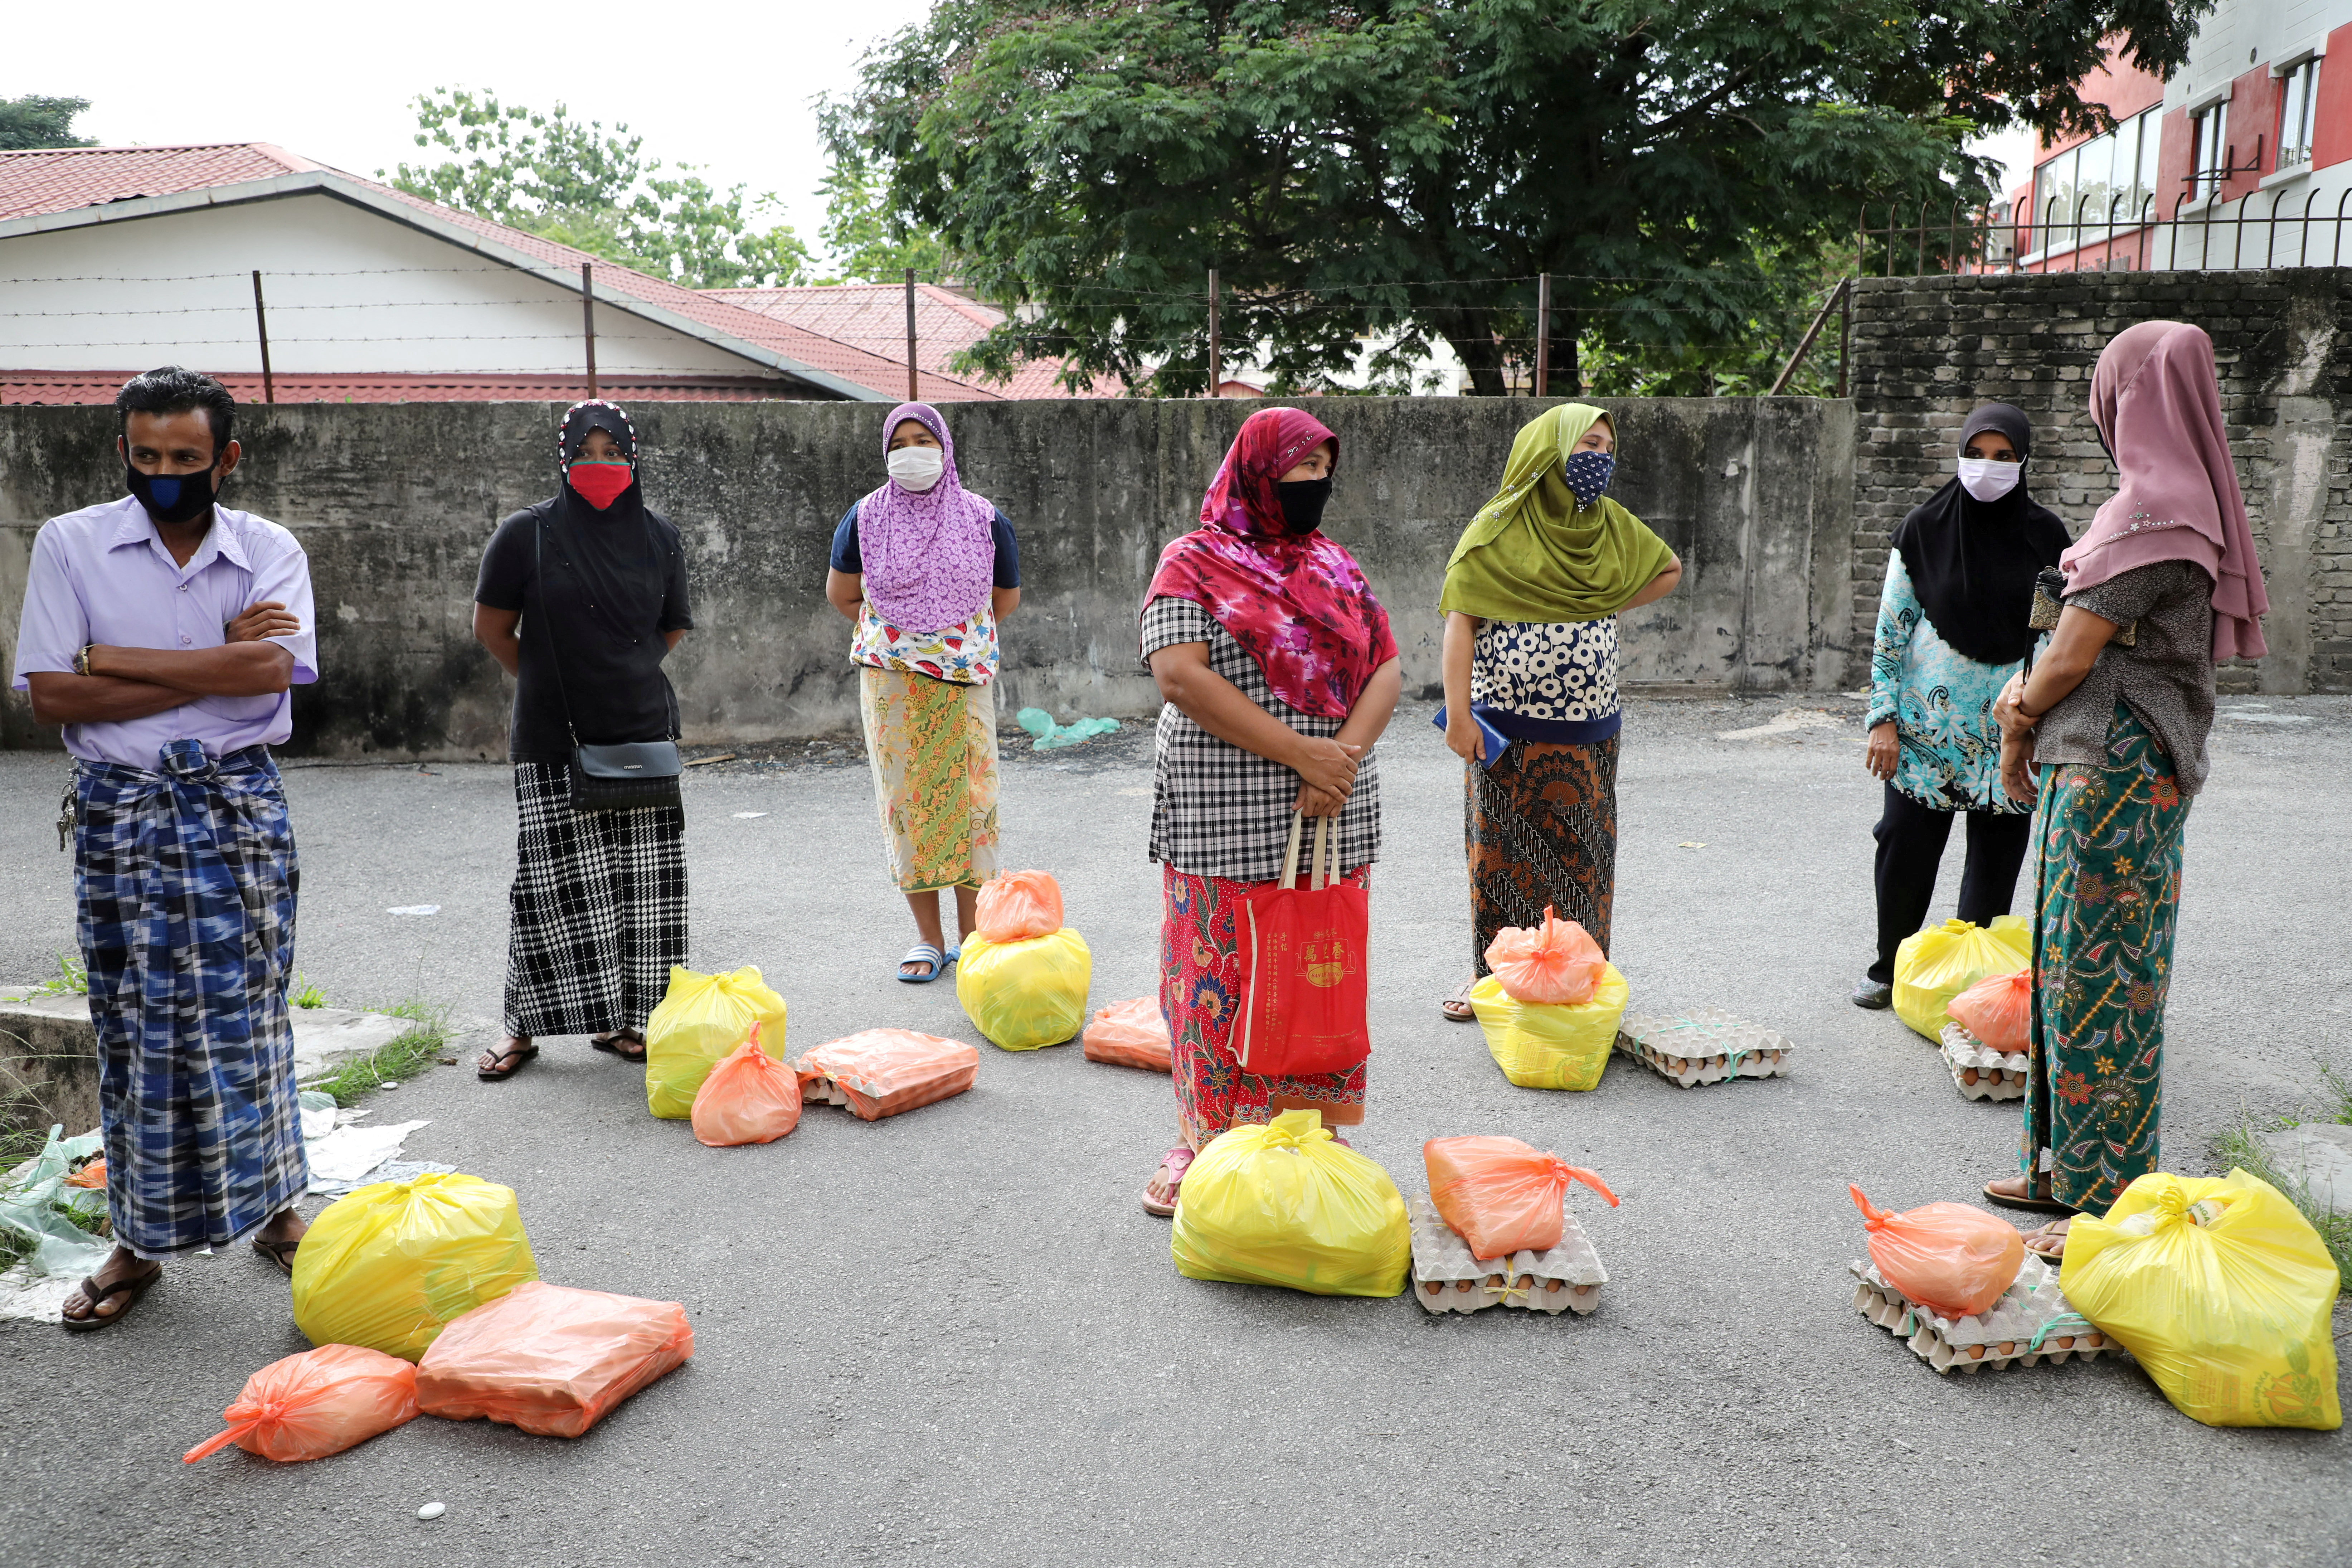 Rohingya refugees wearing protective masks keep a social distance while waiting to receive goods from volunteers, during the movement control order due to the outbreak of the coronavirus disease (COVID-19), in Kuala Lumpur